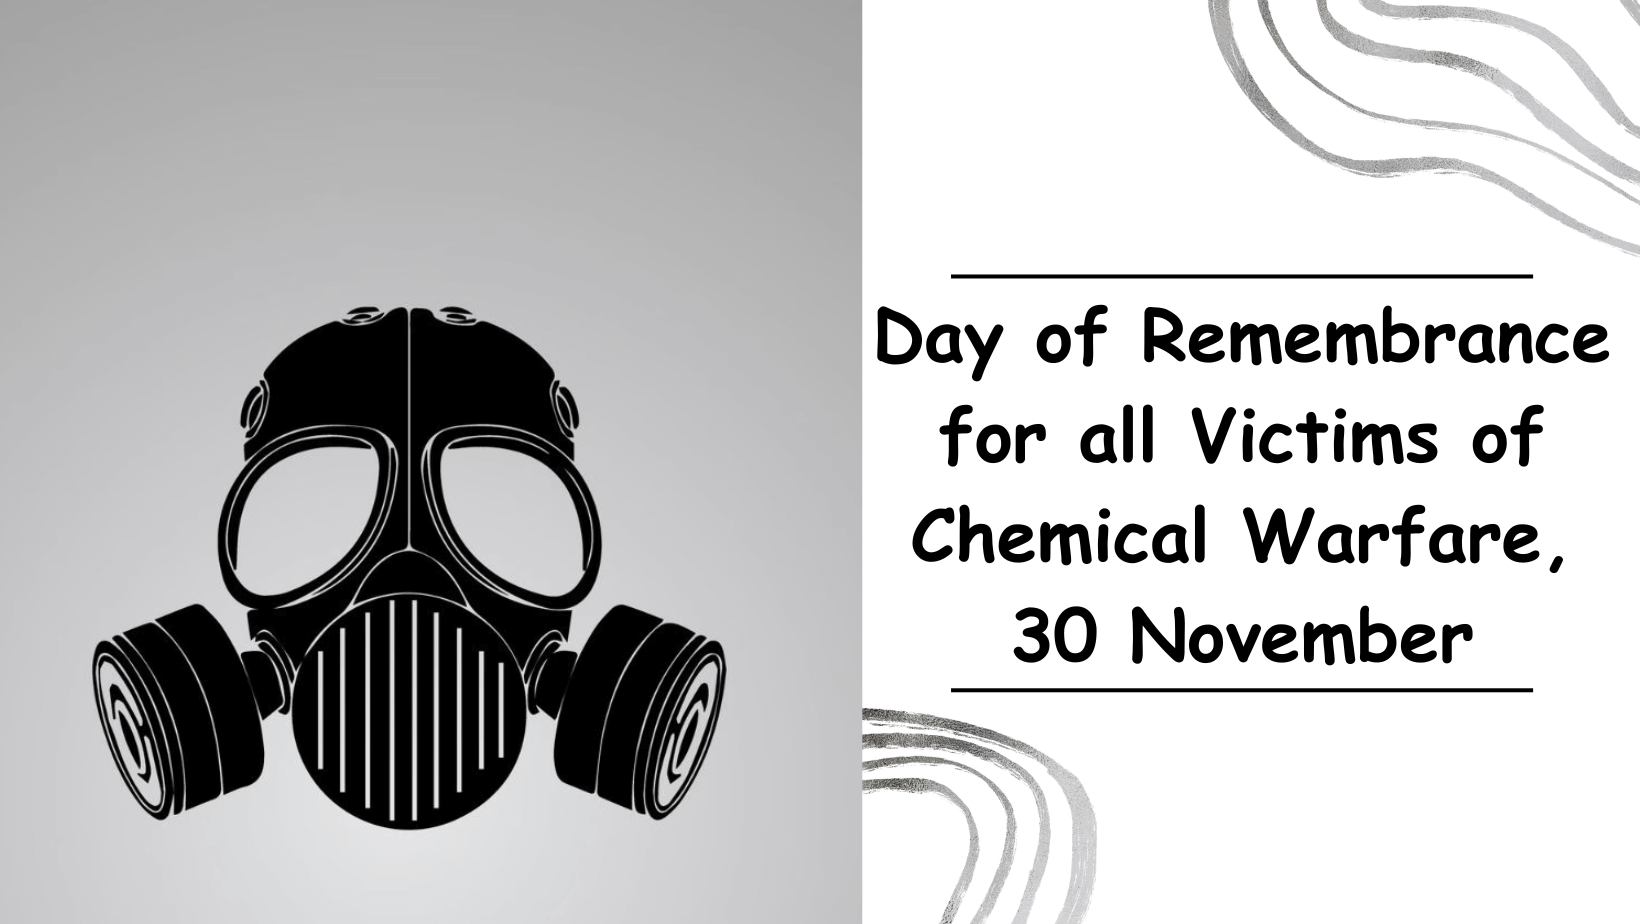 Day of Remembrance for all Victims of Chemical Warfare, 30 November